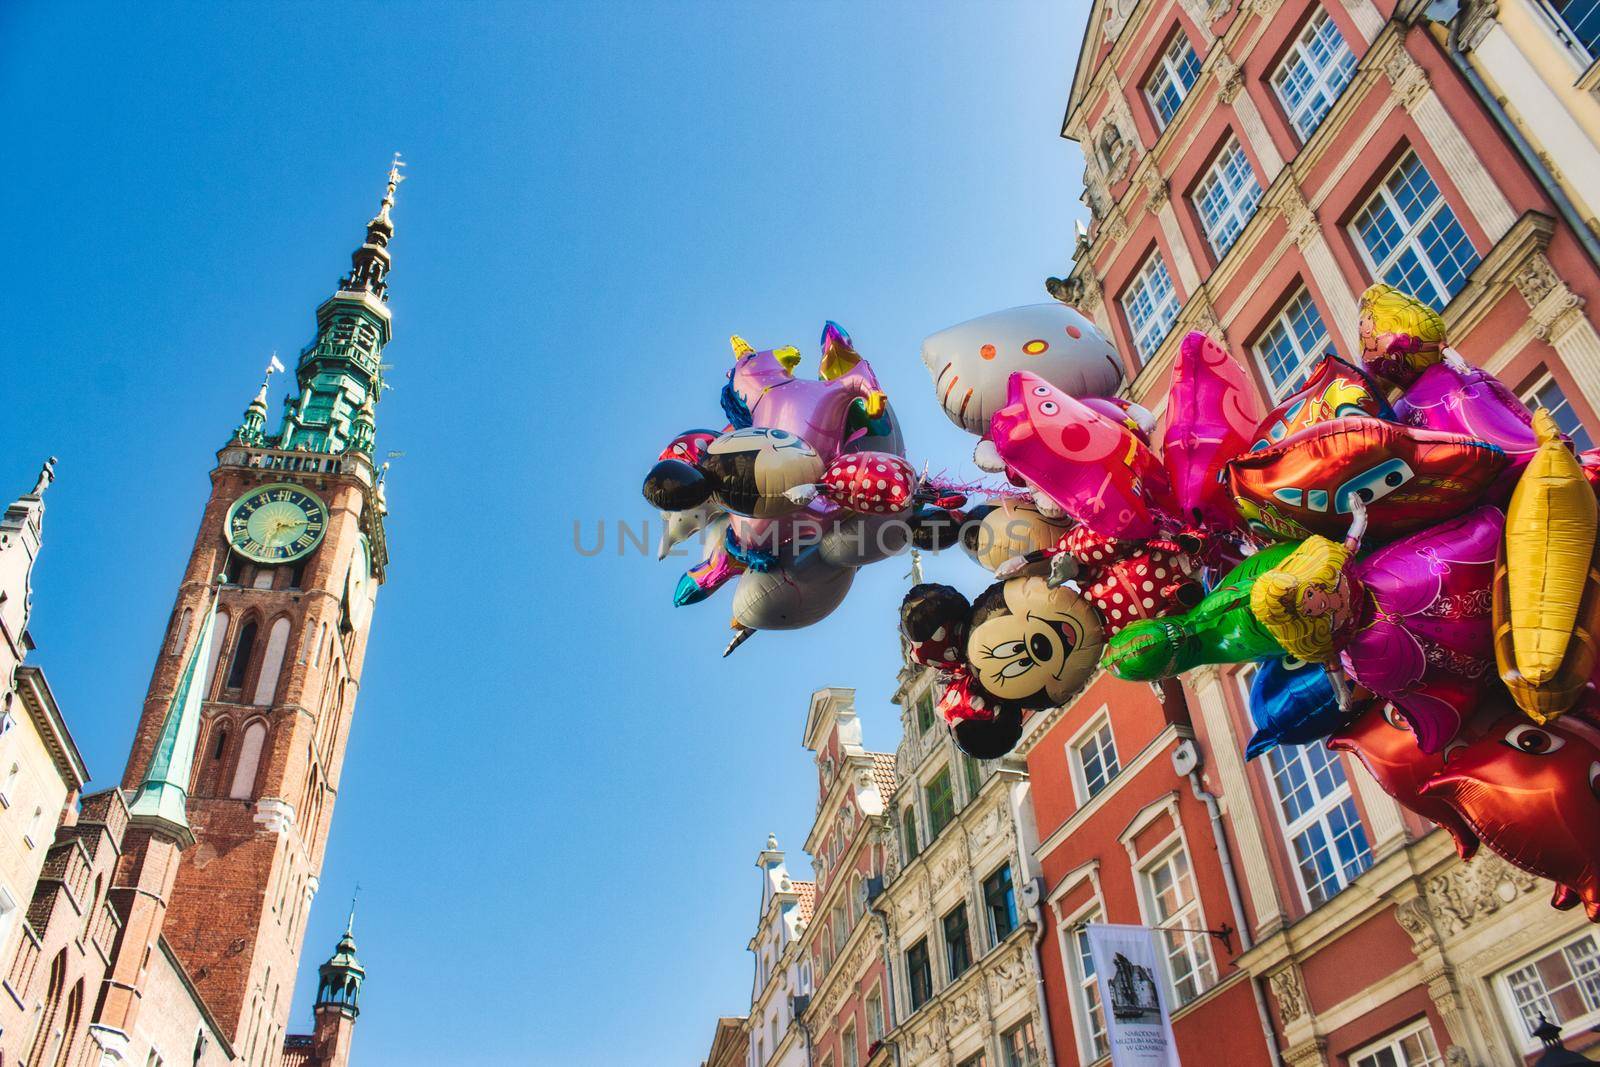 Gdansk / Poland - August 8 2019: Balloons shaped like popular children´s characters being sold in the main square in the city center of Gdansk, Poland by tennesseewitney